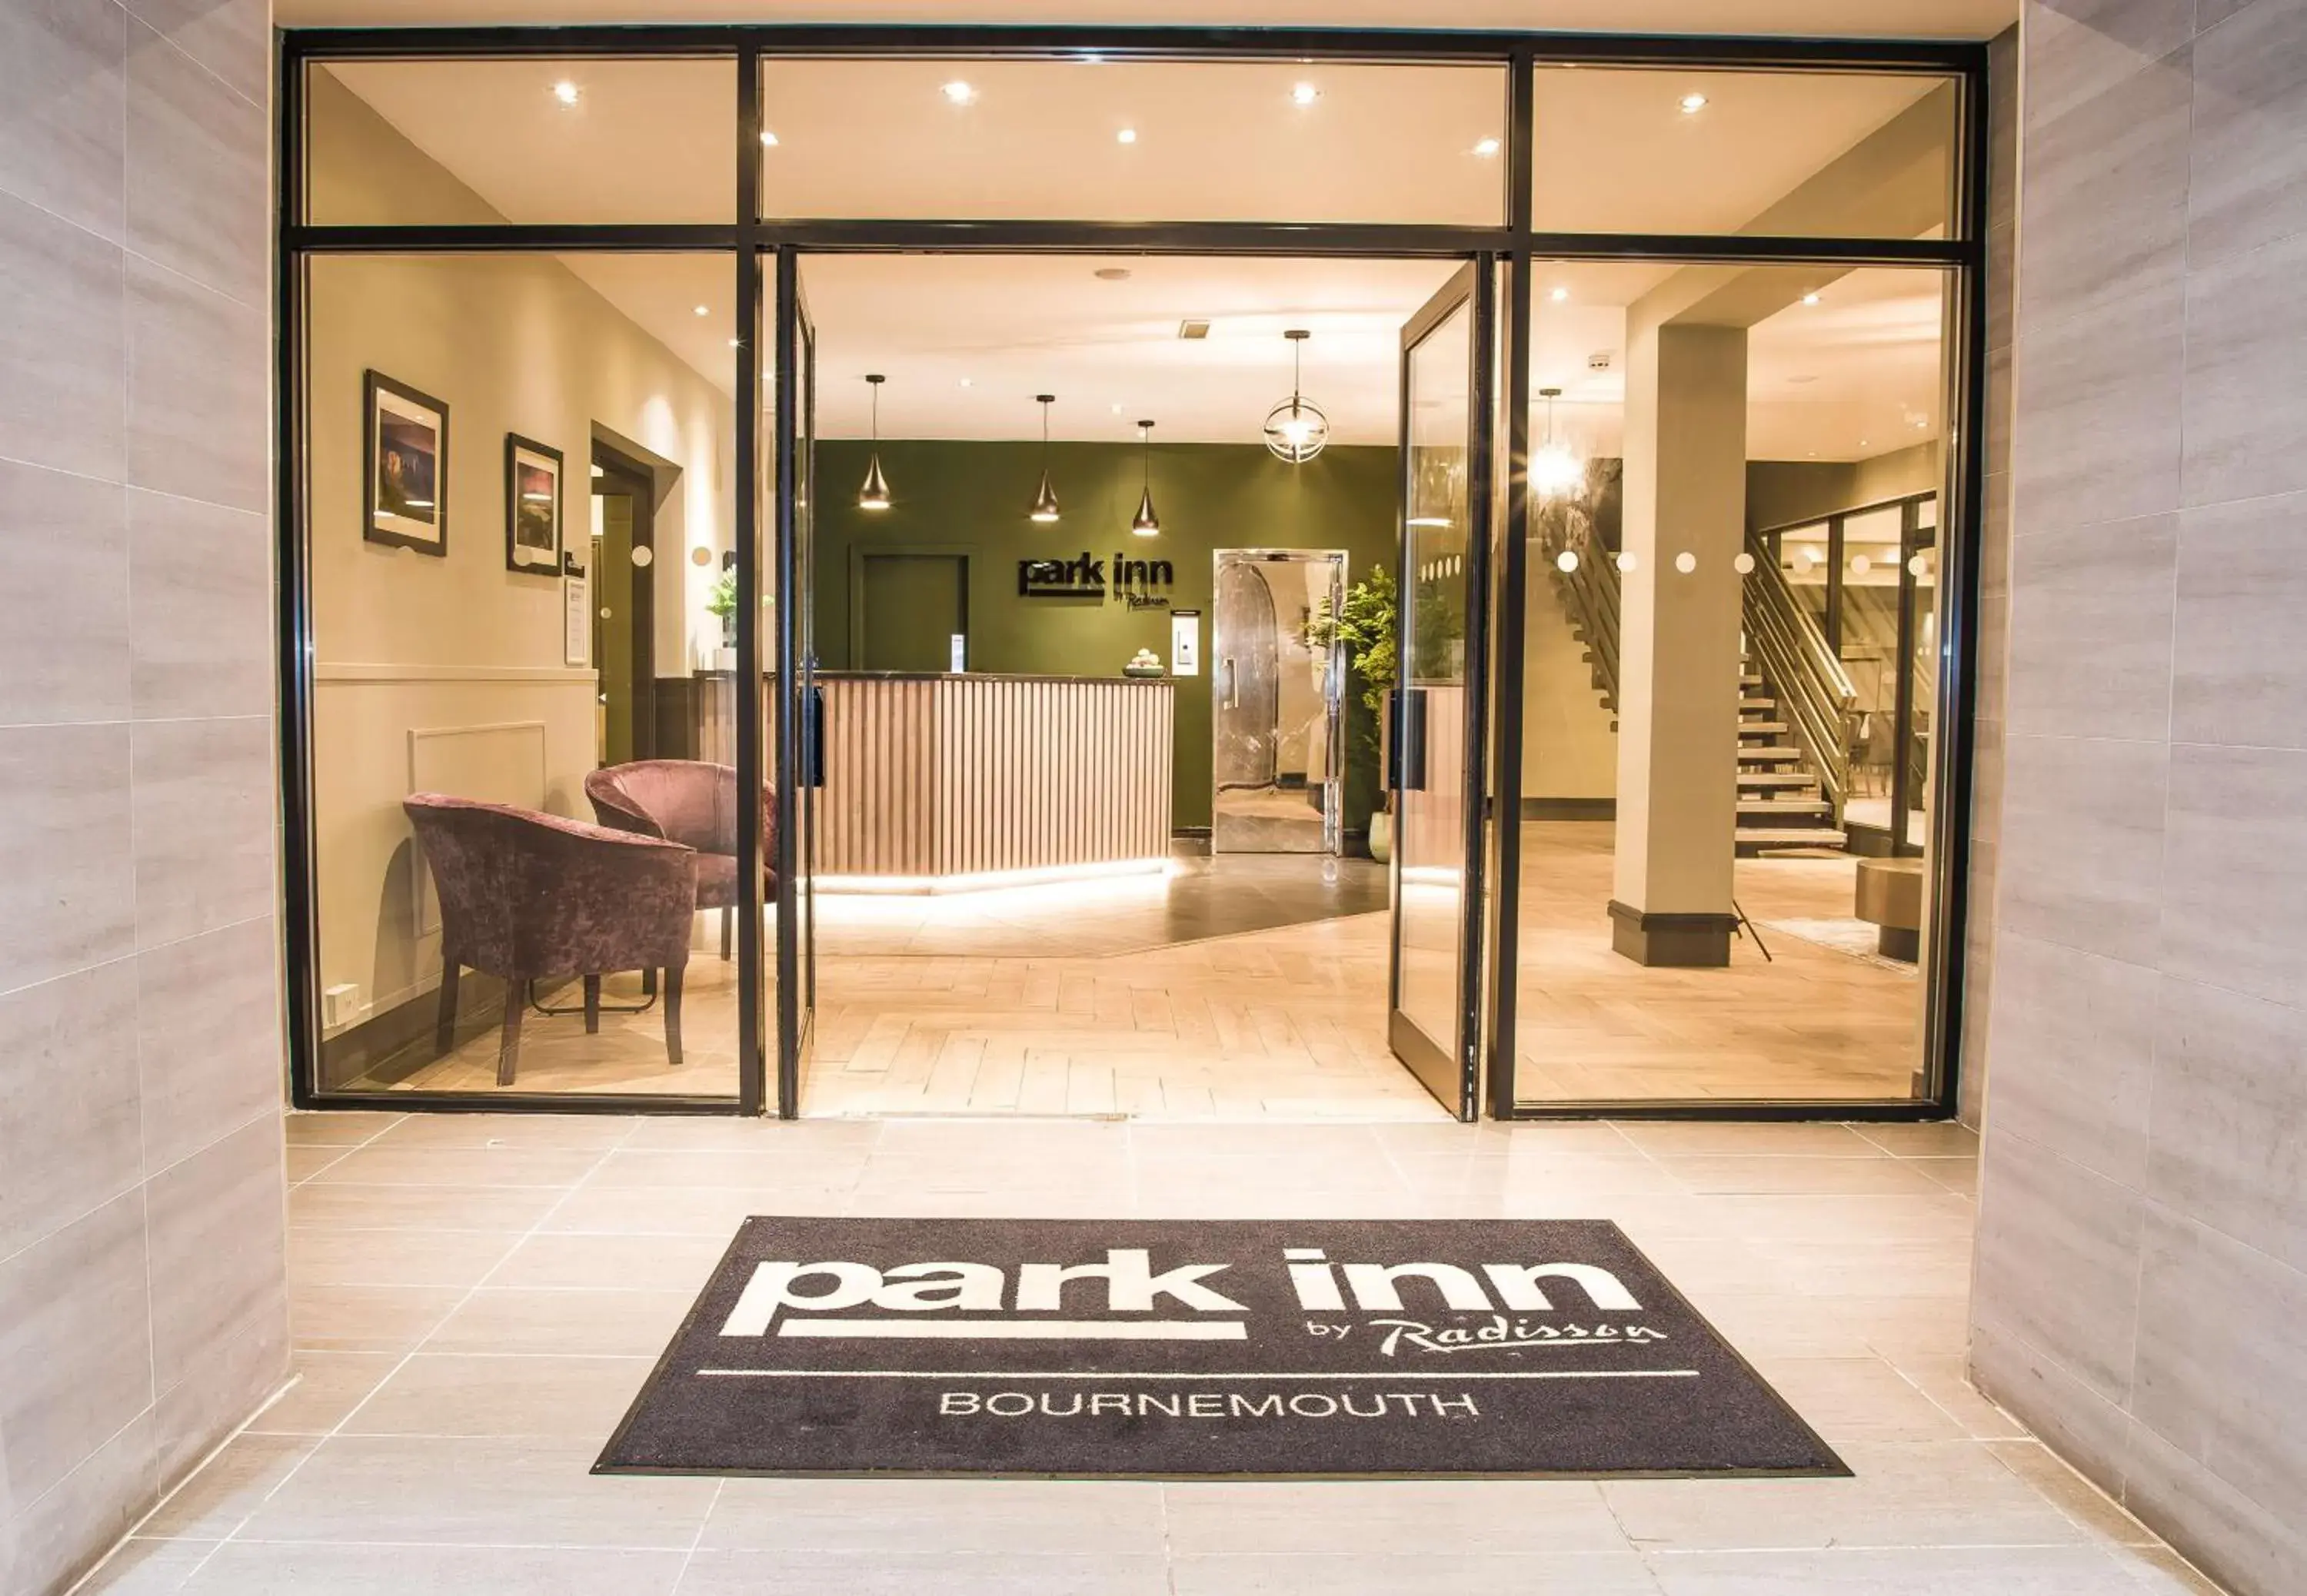 Property building in Park Inn by Radisson Bournemouth